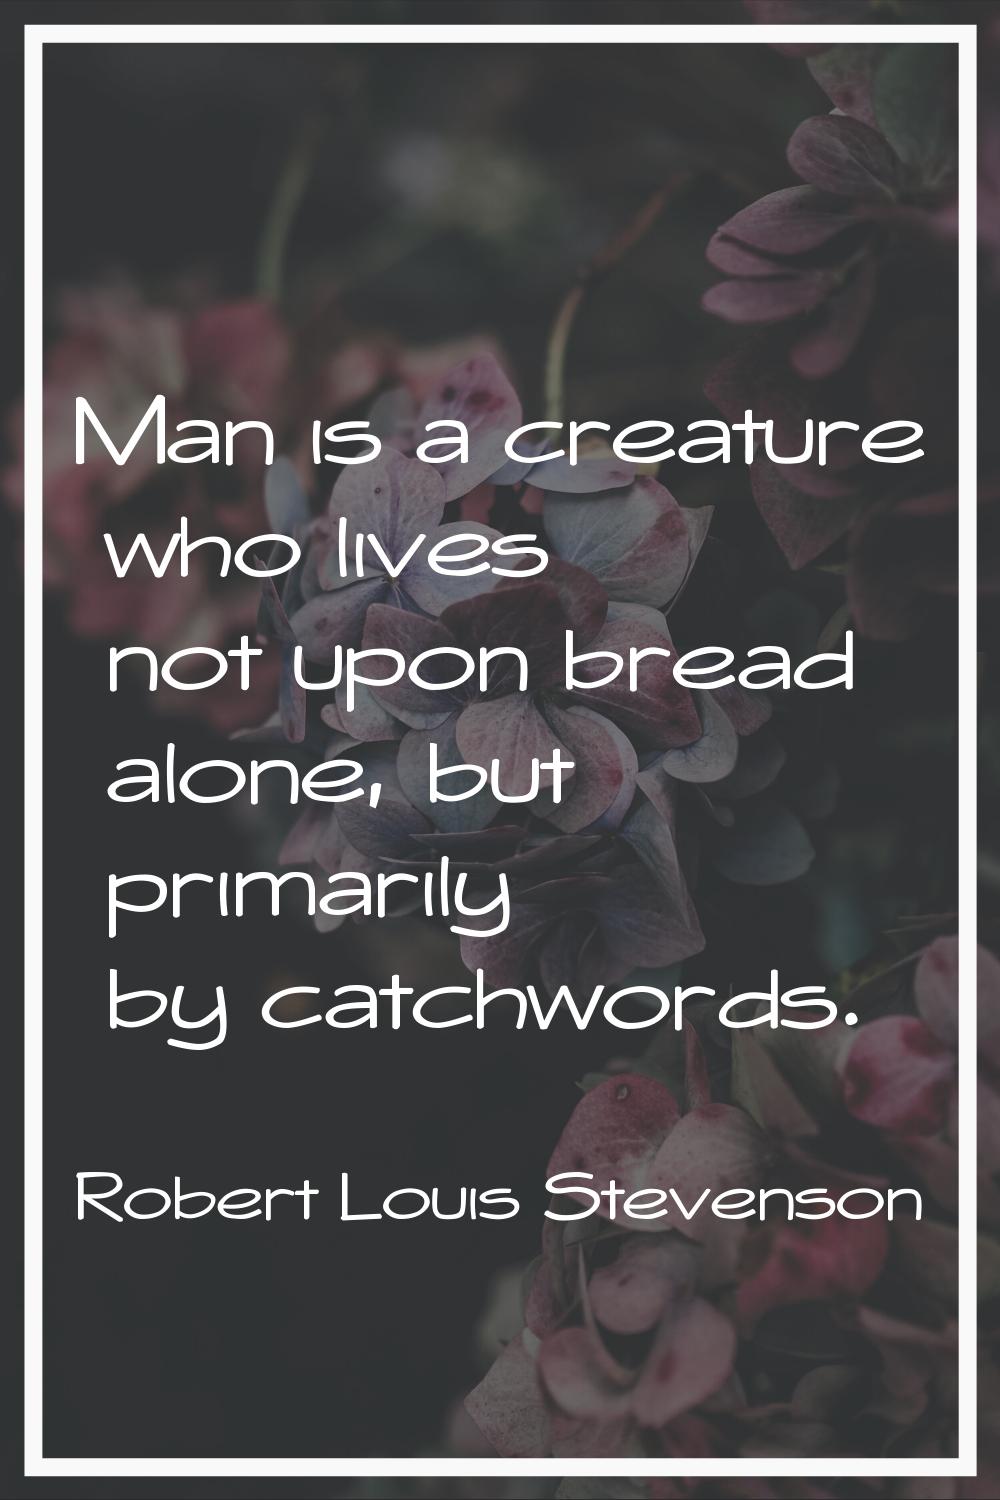 Man is a creature who lives not upon bread alone, but primarily by catchwords.